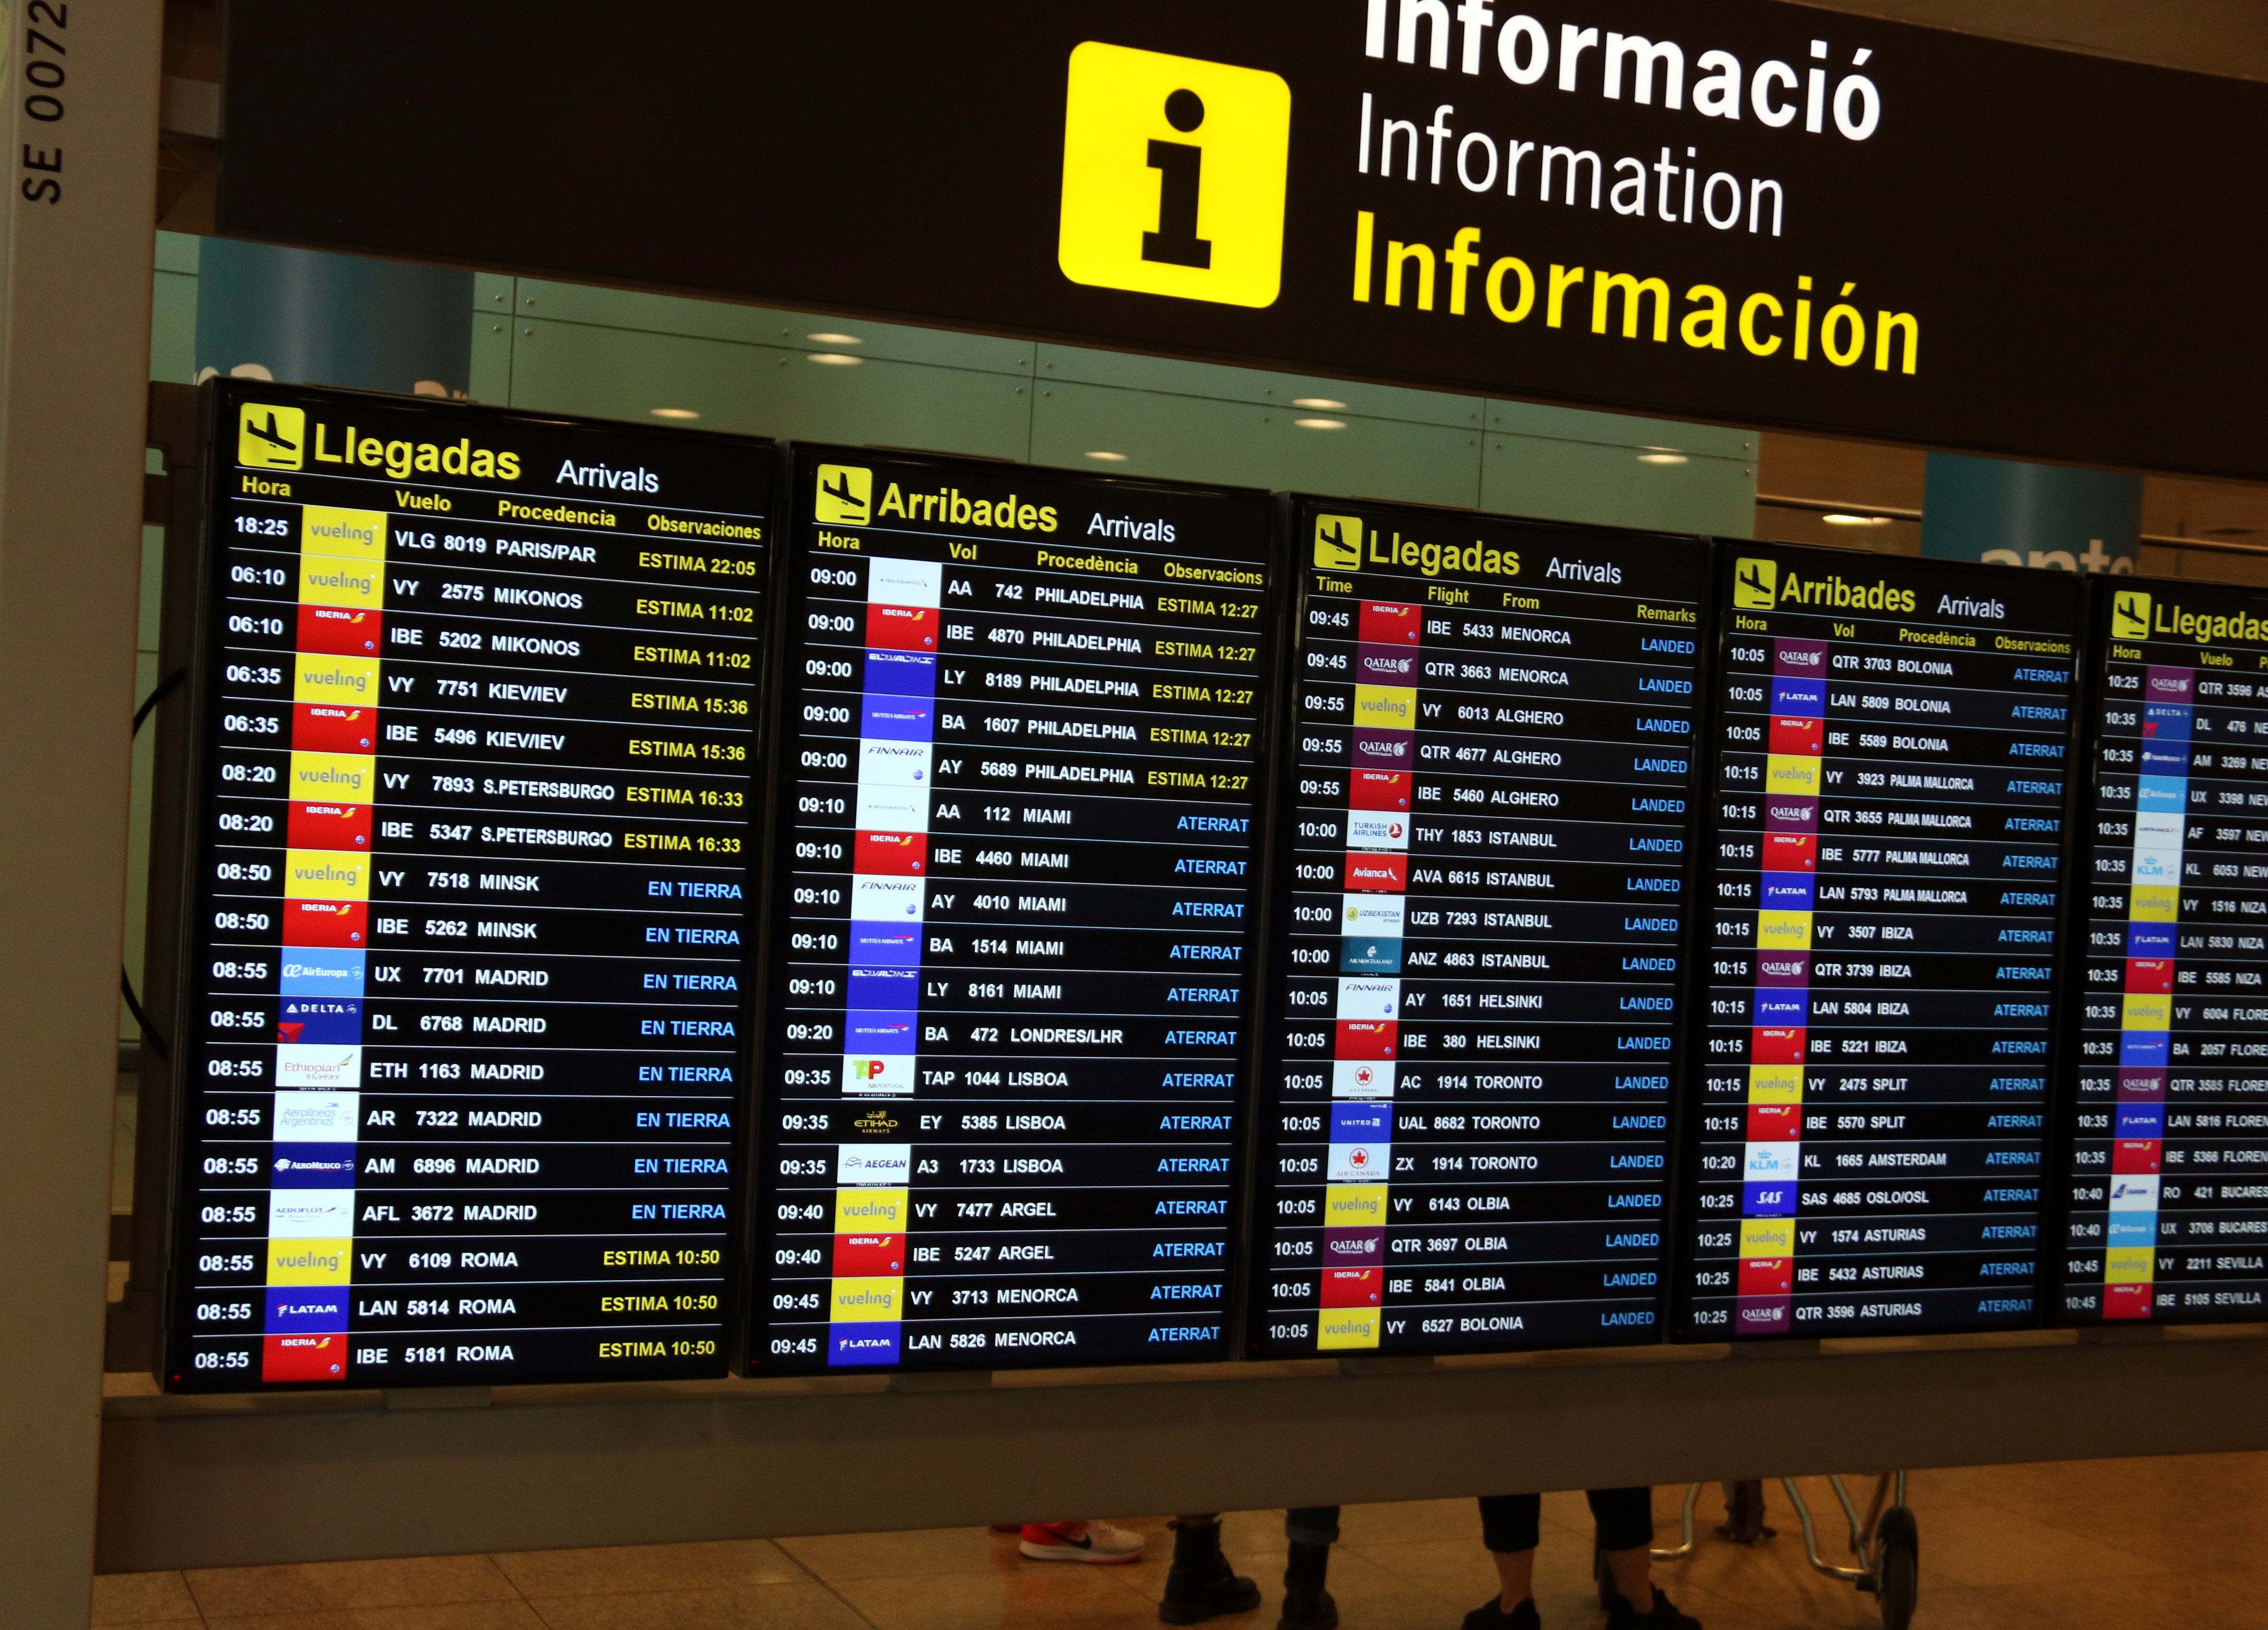 Barcelona-El Prat airport security indefinite strike to start this Friday, 9th August